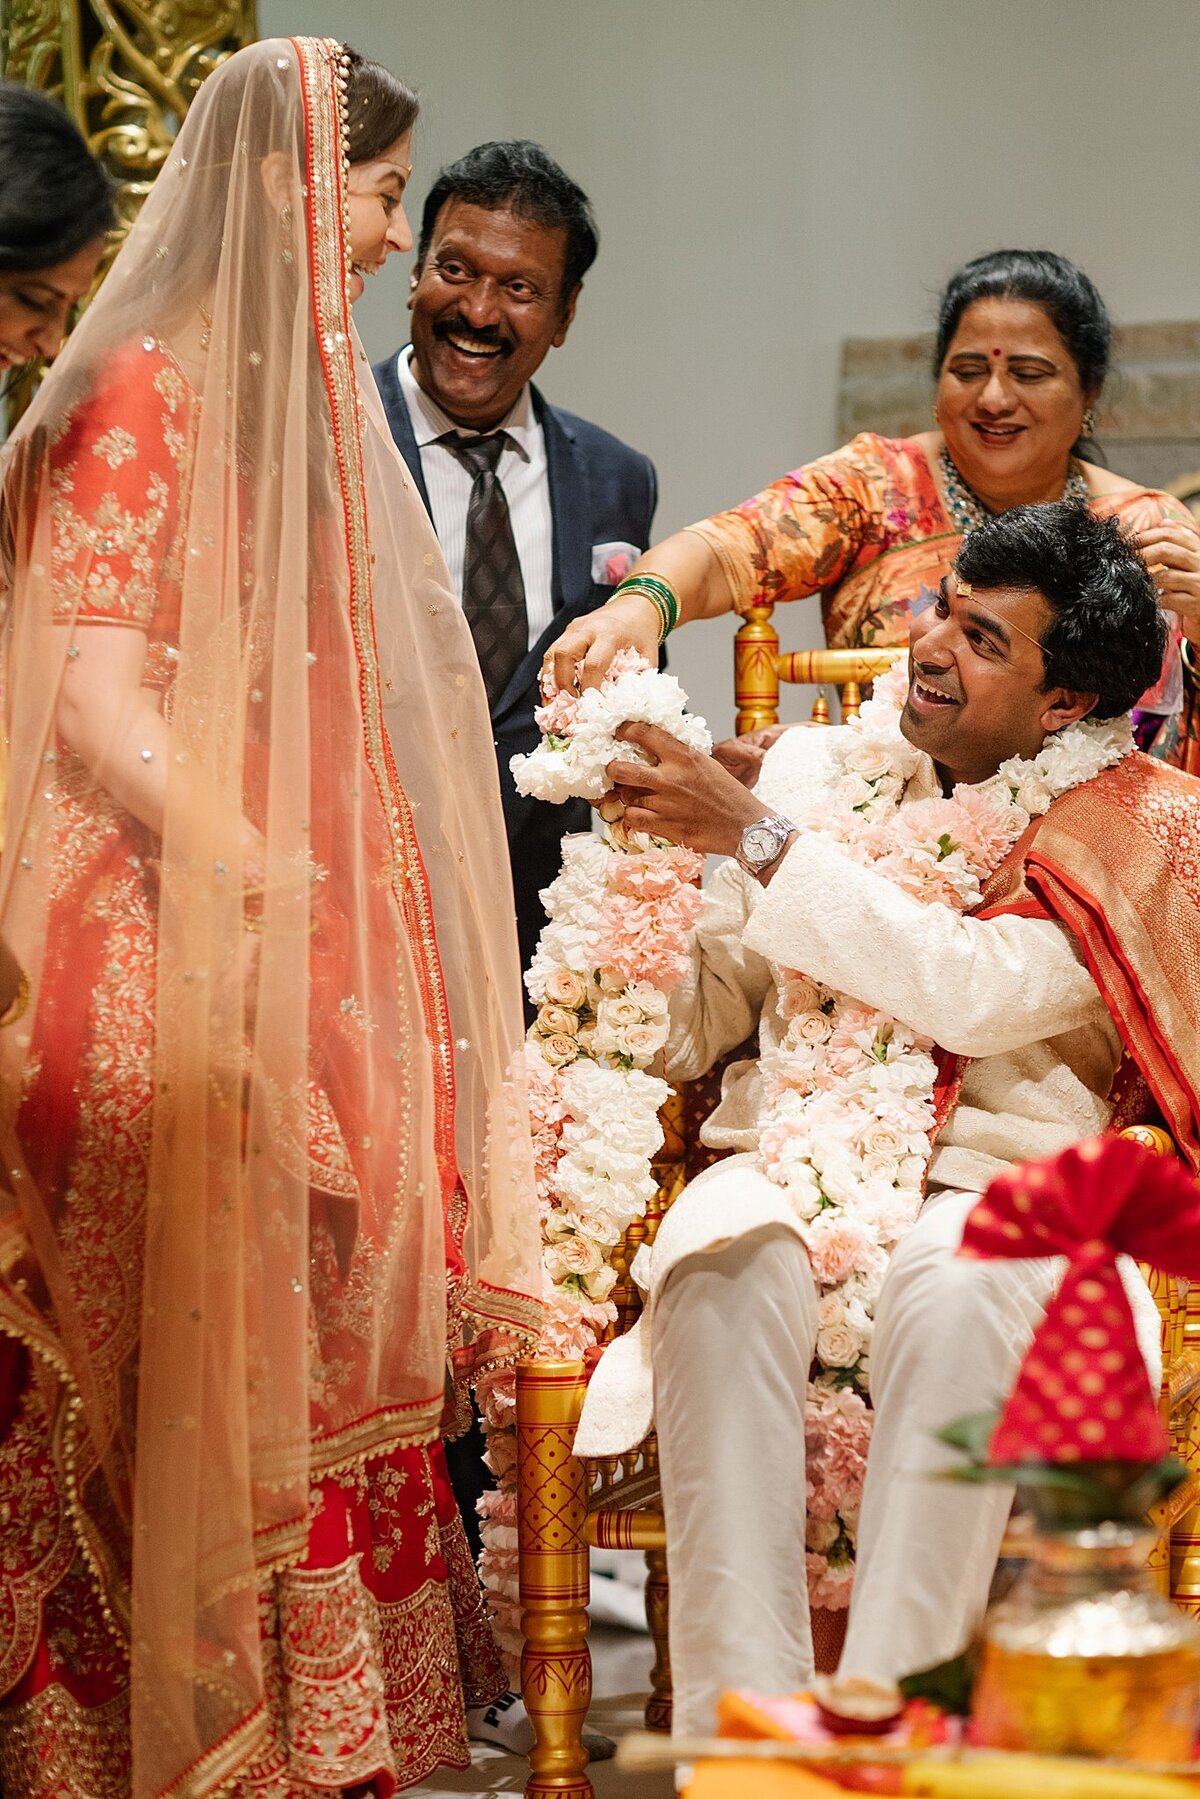 An Indian groom wearing a white sherwani with a red dupatta offers a white and blush floral varmala to a Hindu bride wearing a gold and red saree in Nashville, TN